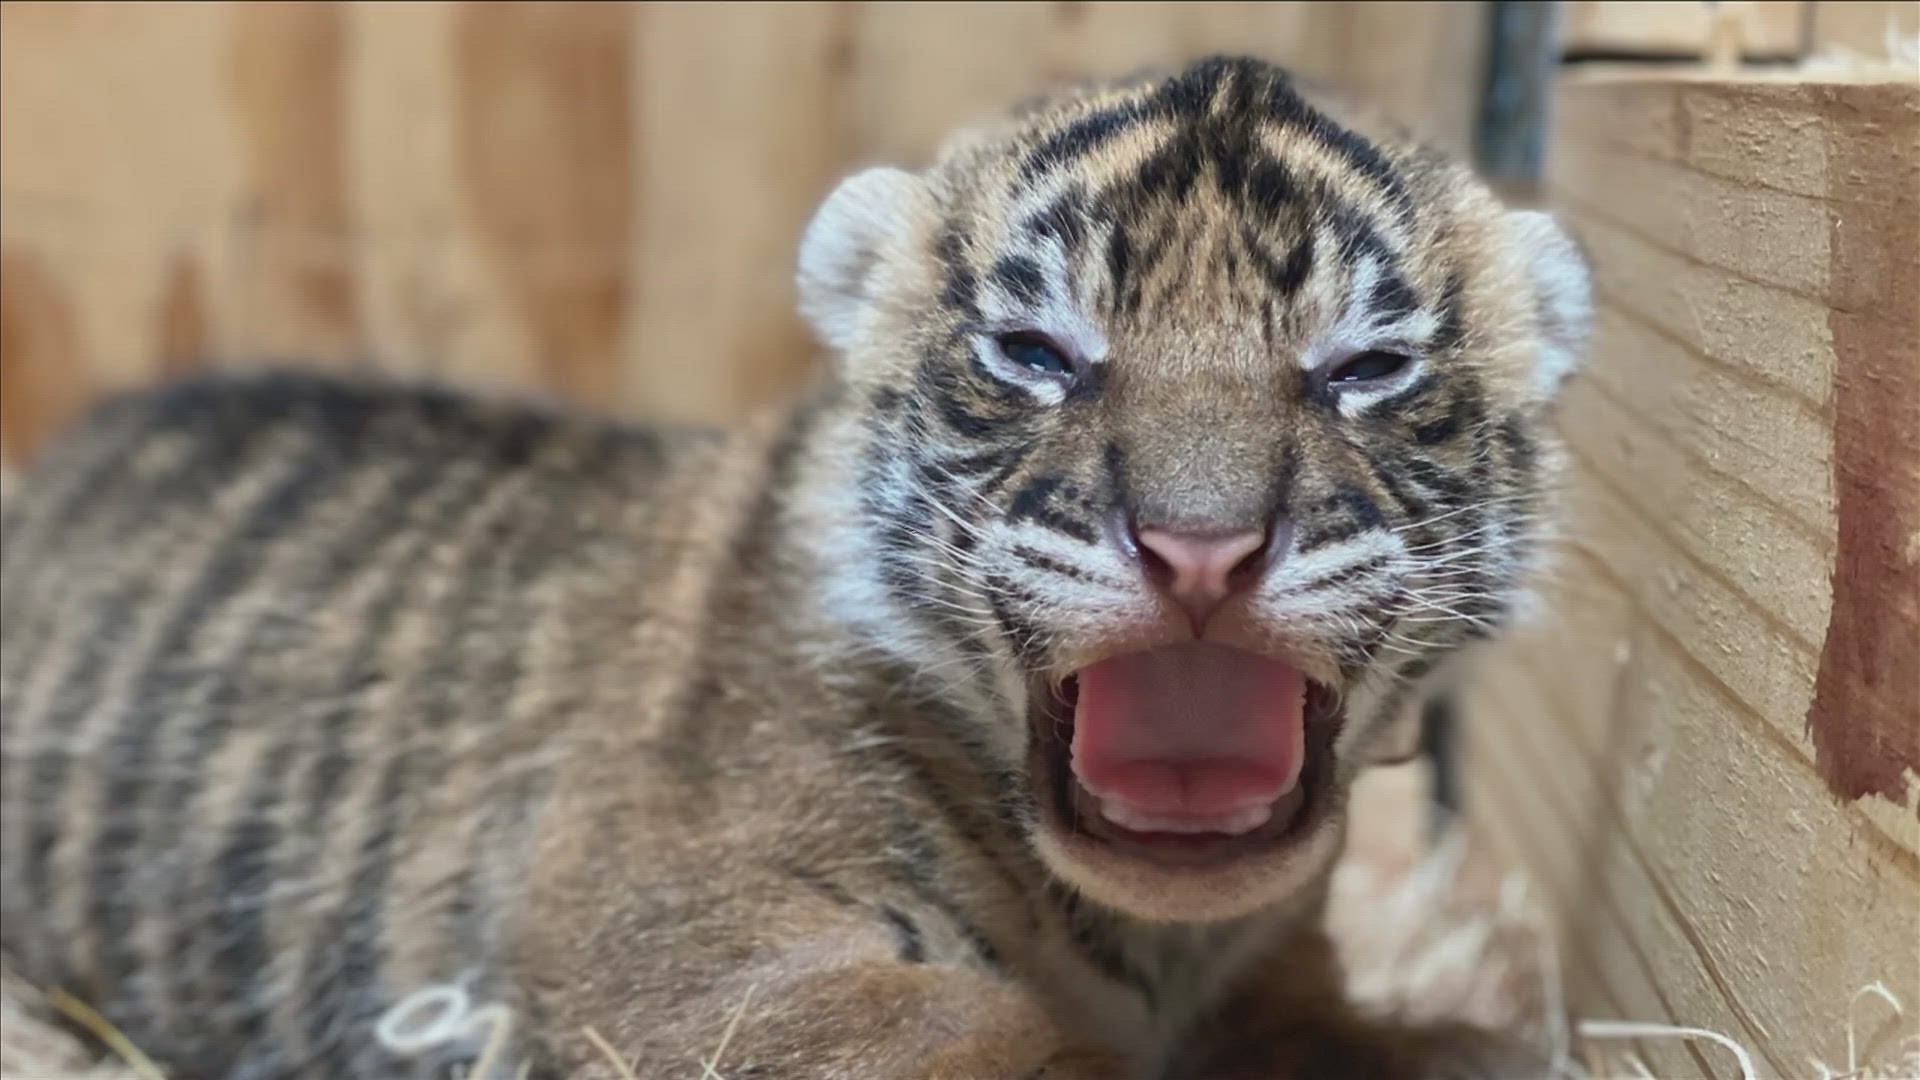 The birth of the cubs is part of a larger effort by the Memphis Zoo to help preserve the tiger population around the world.